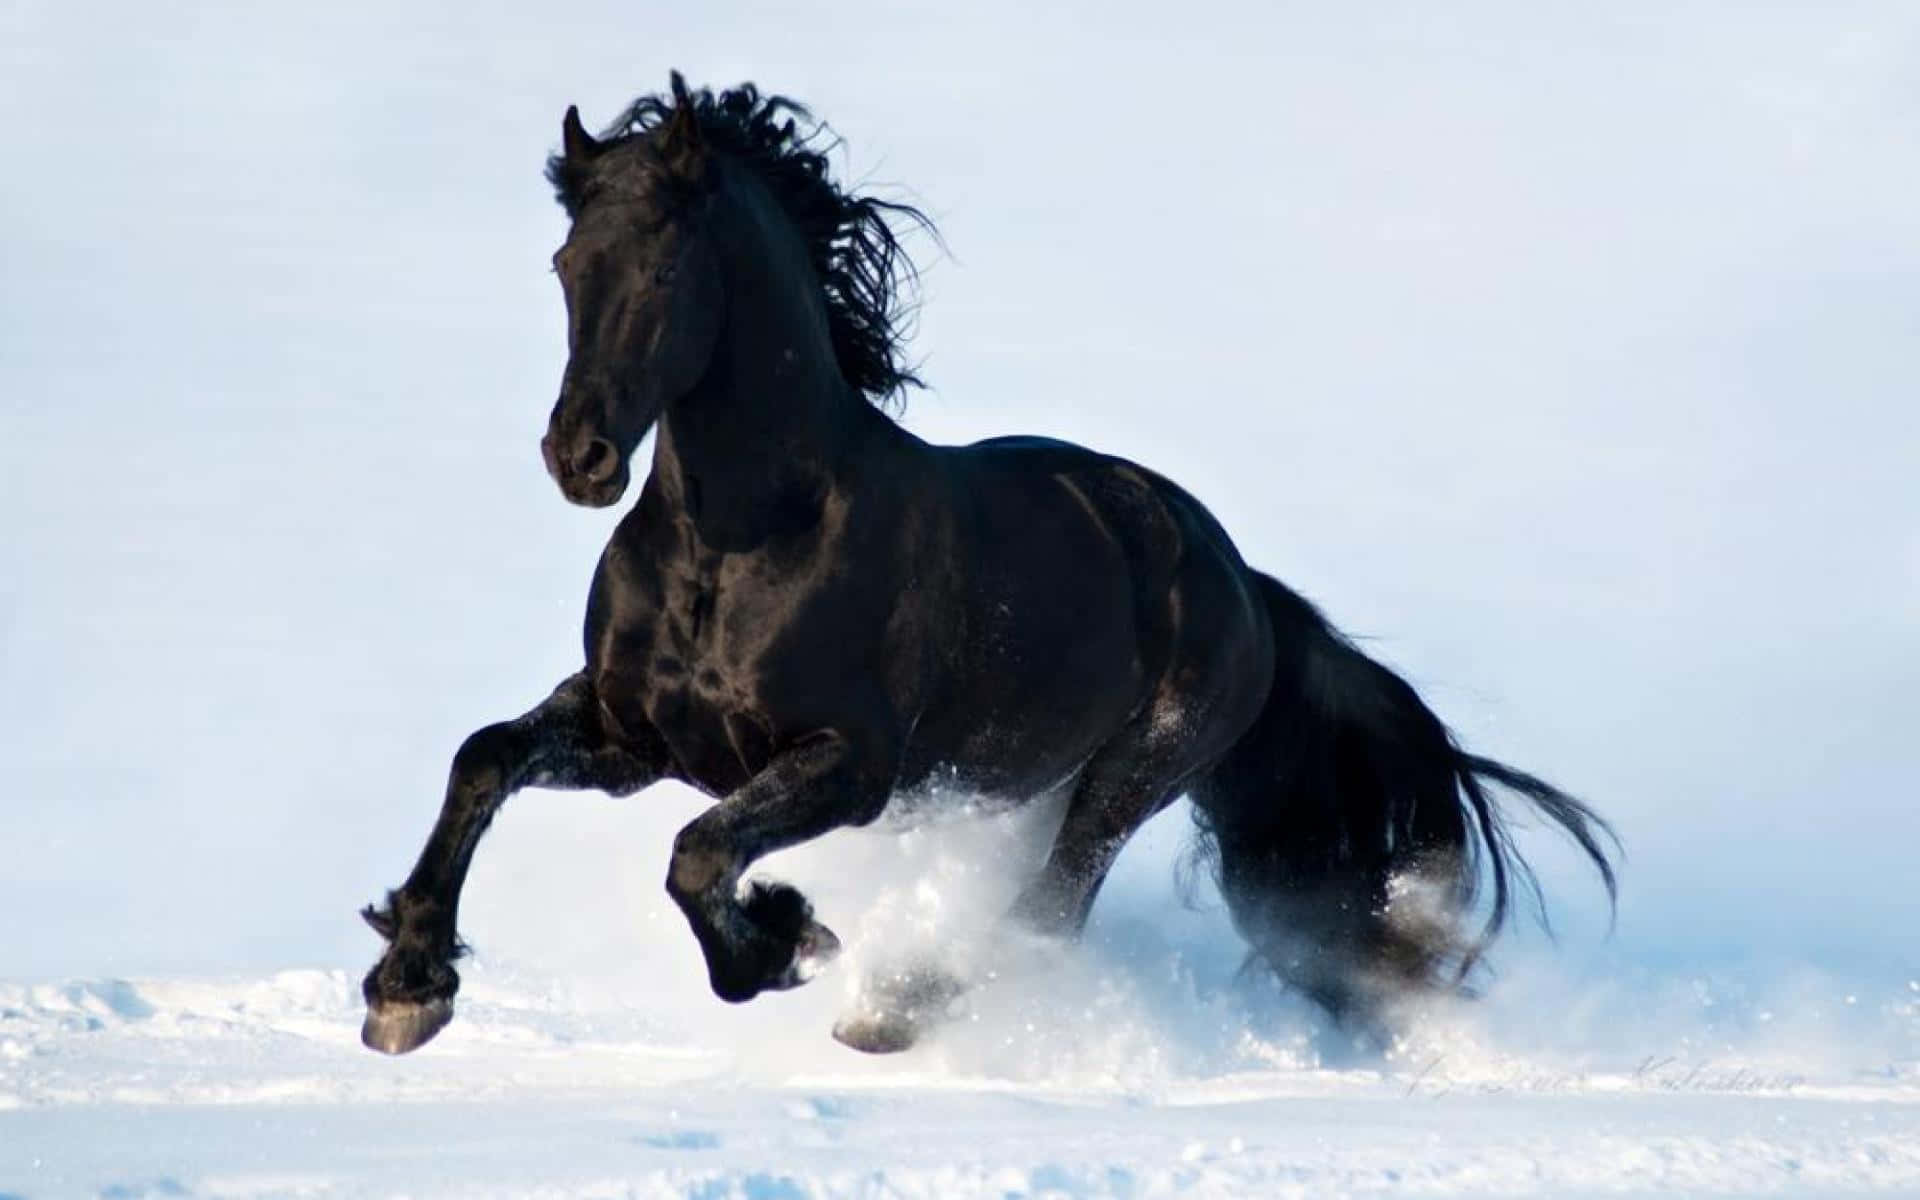 "The beauty of the black horse"